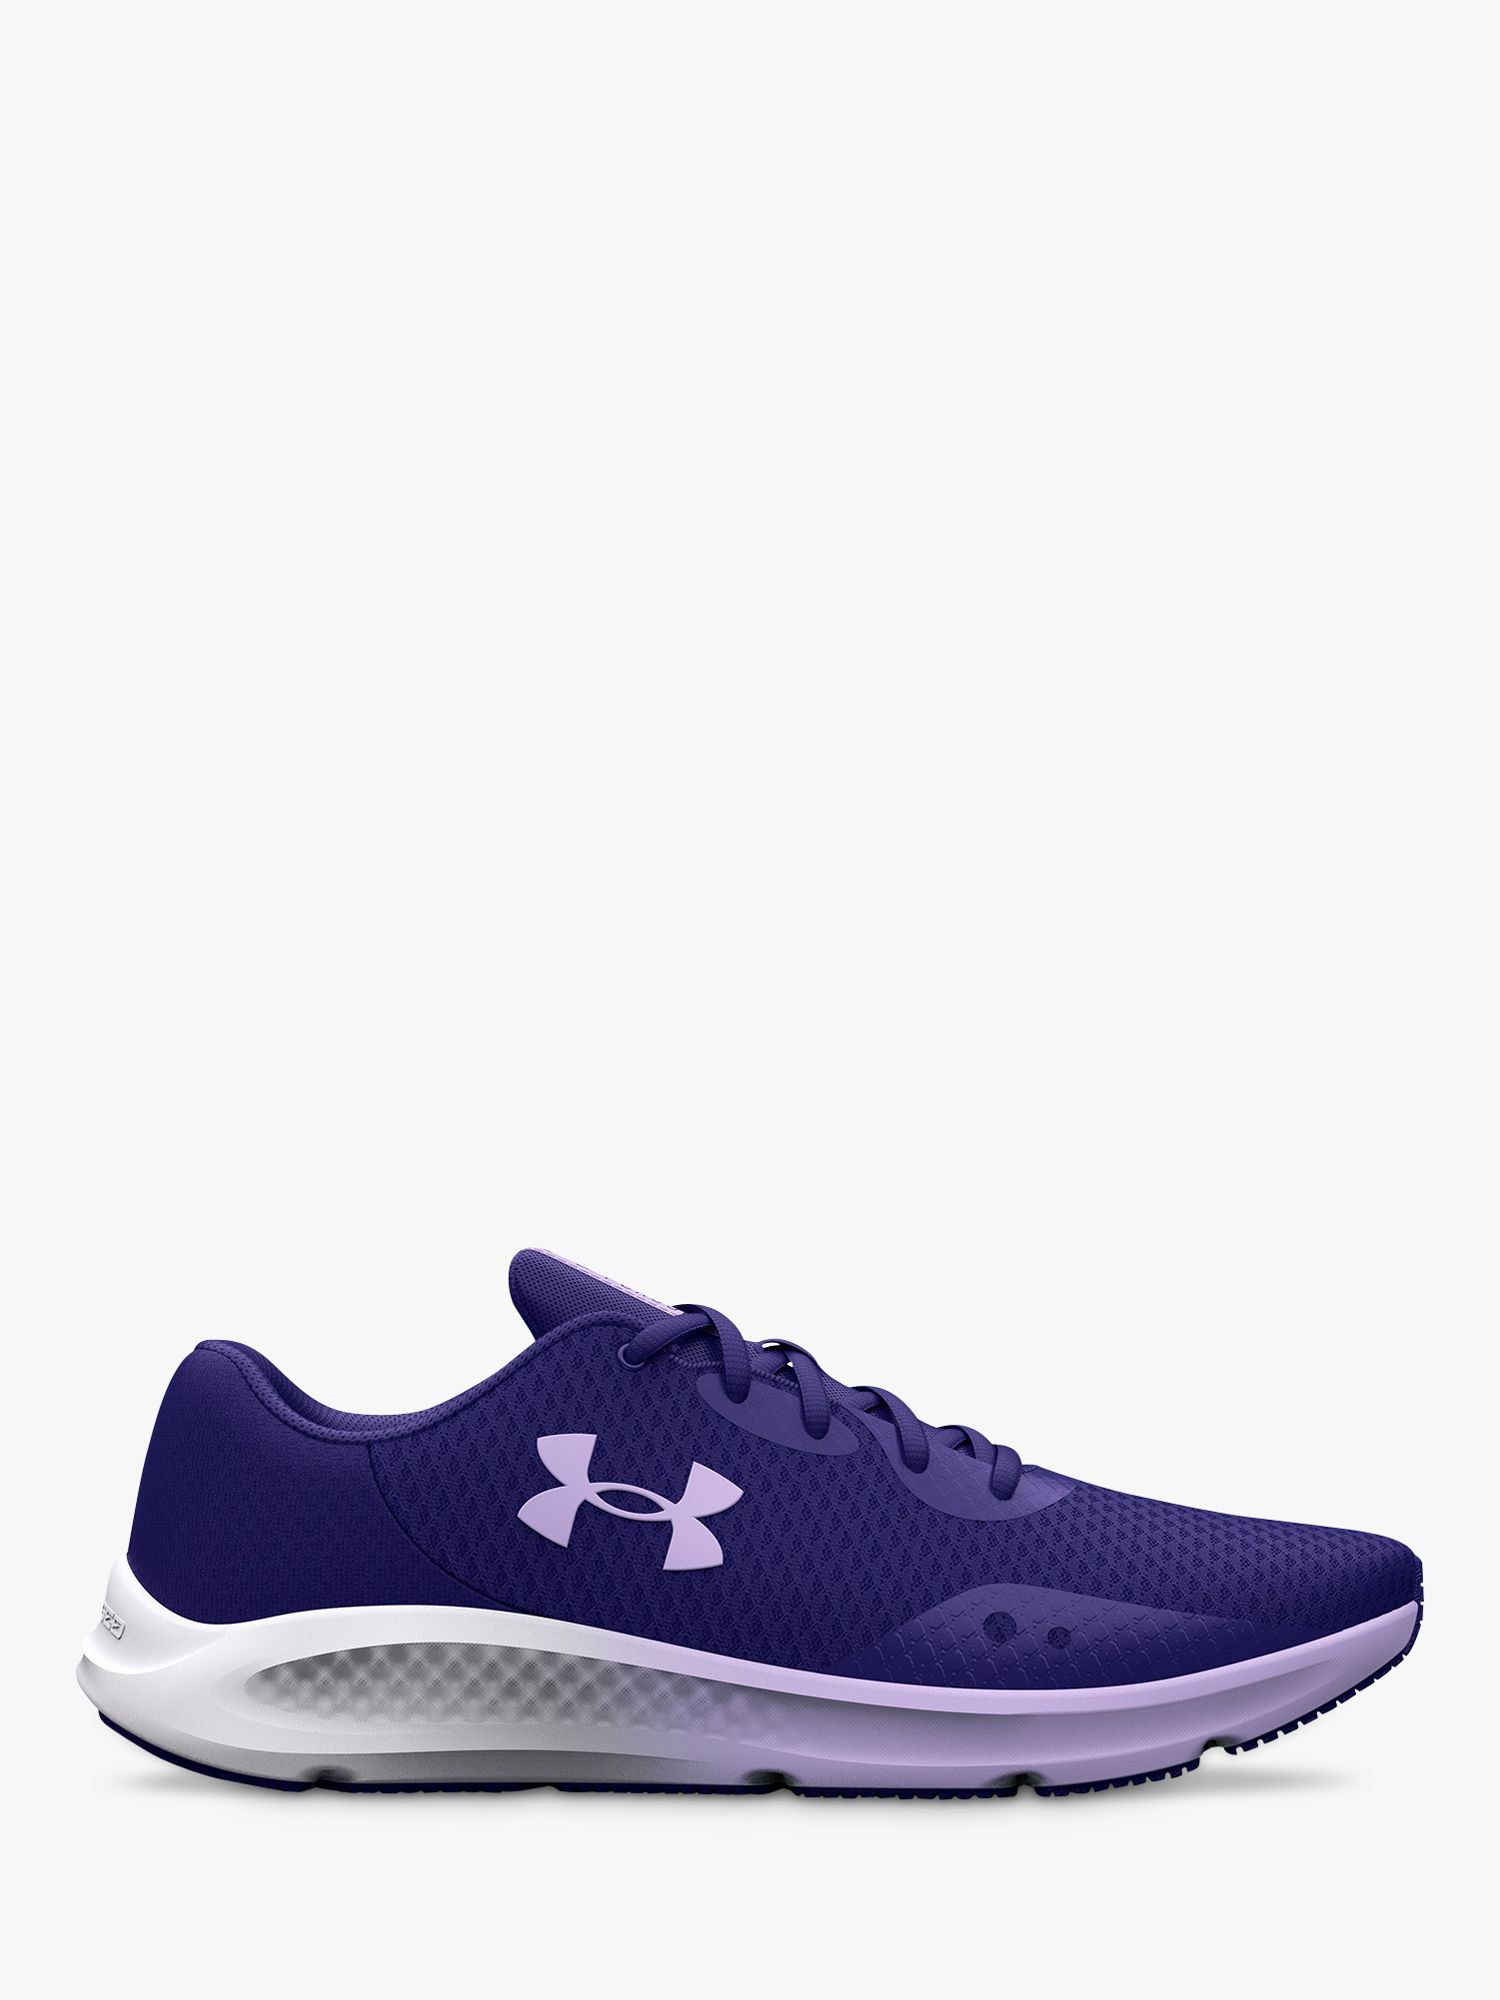 Under Armour Charged Pursuit 3 Women's Running Shoes, Sonar Blue